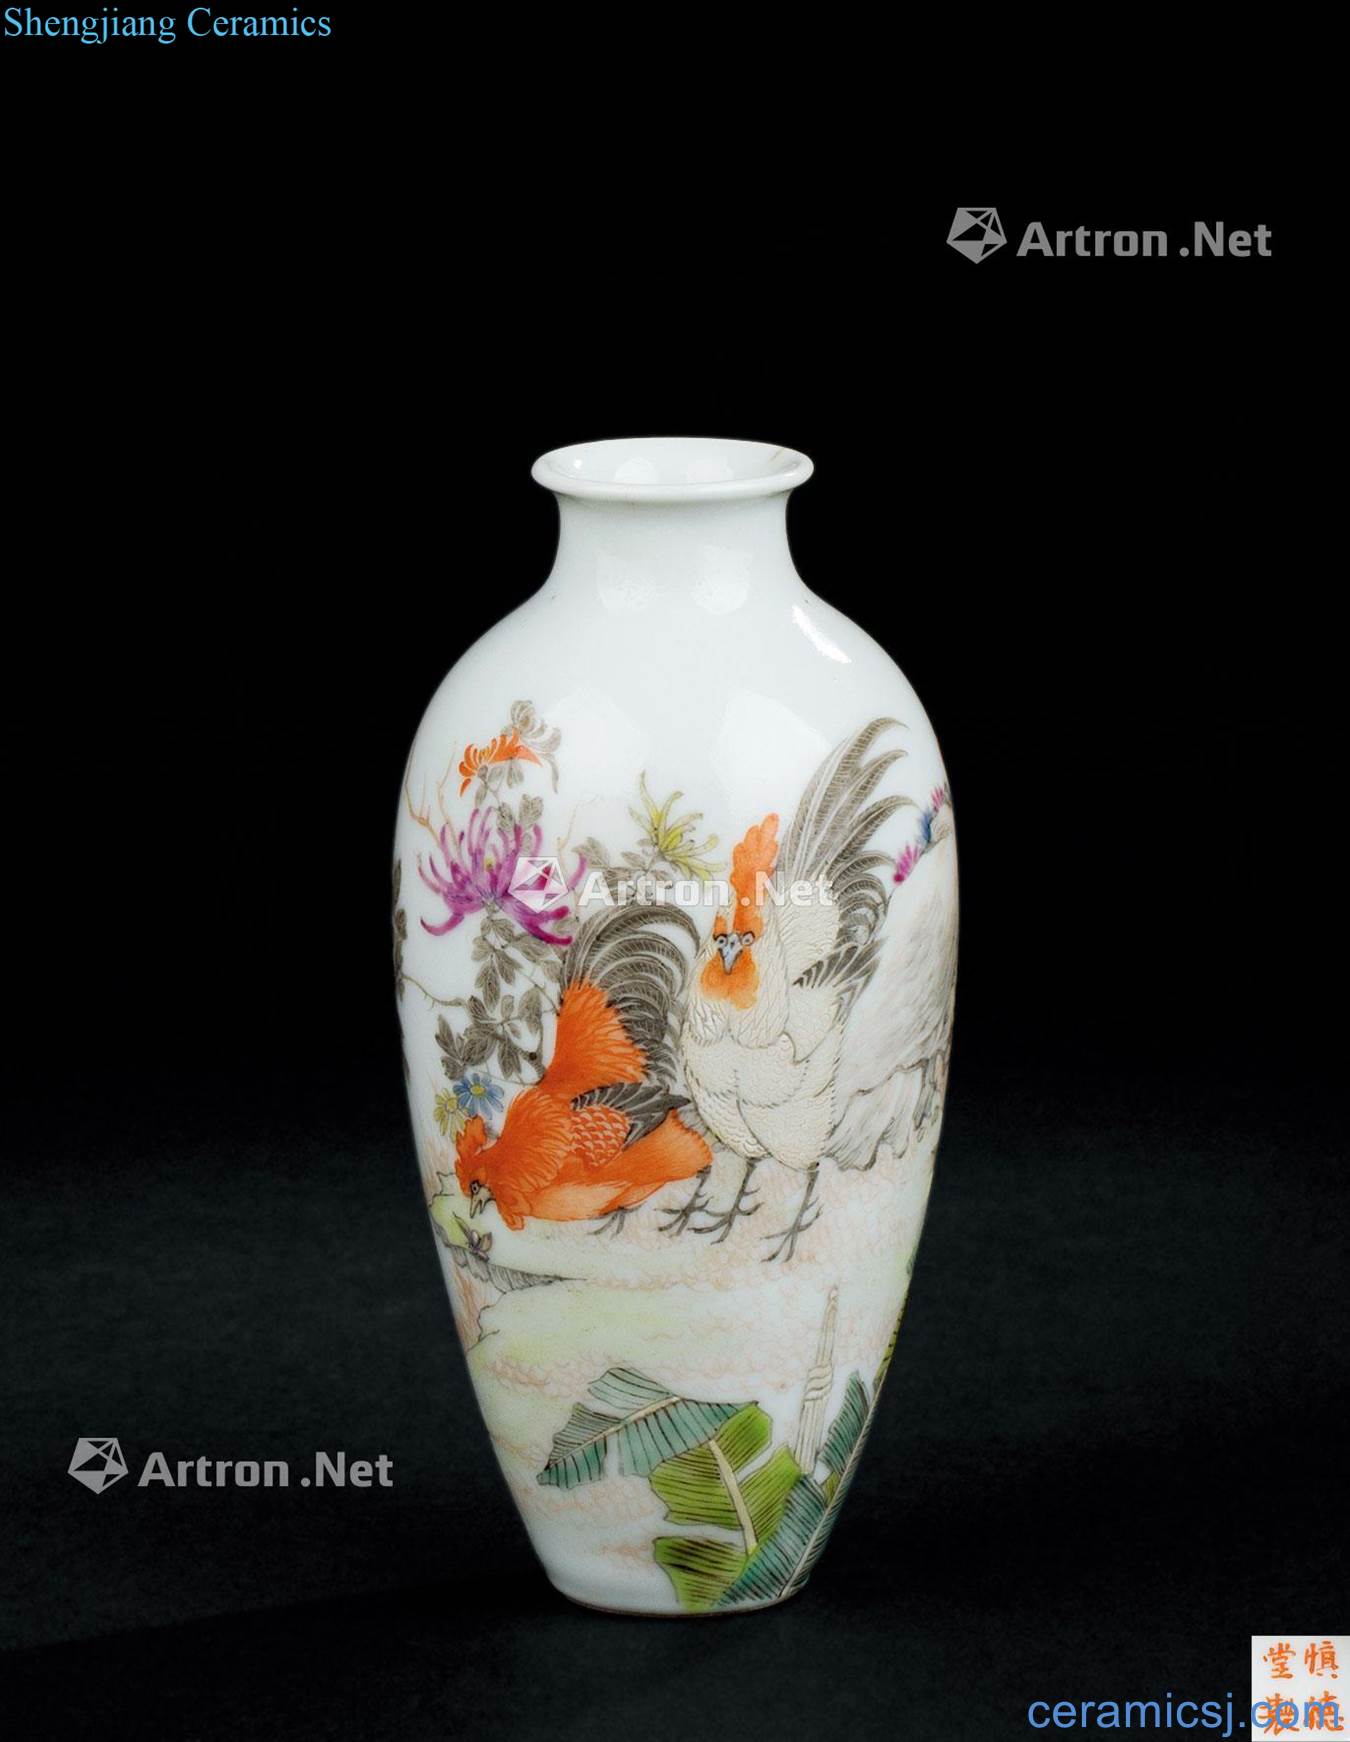 In the qing dynasty (1644-1911), pastel small bottles of fine grain